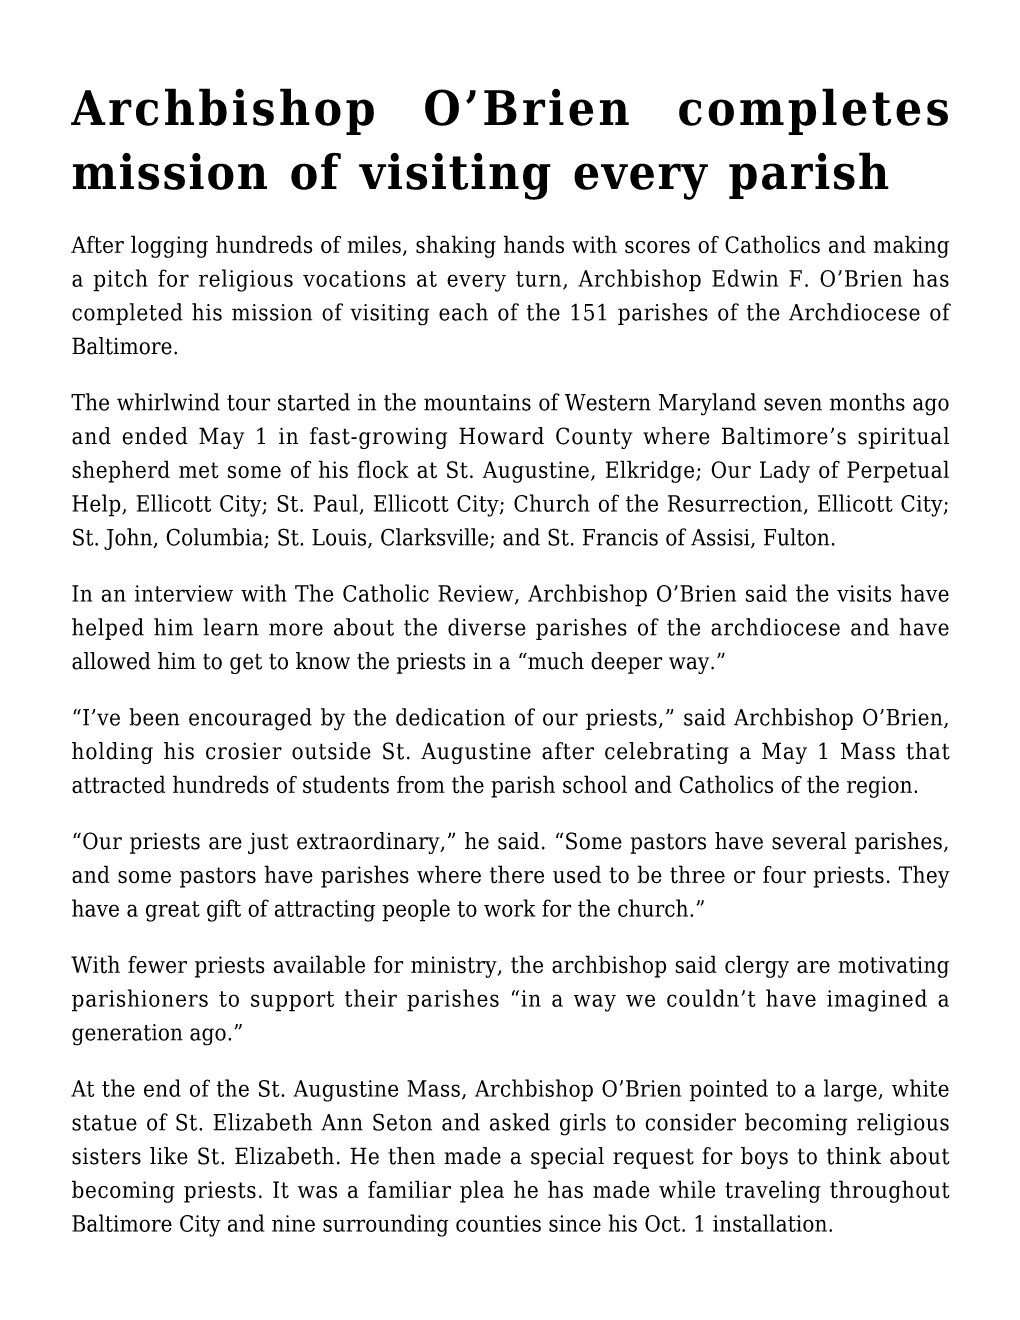 Archbishop O'brien Completes Mission of Visiting Every Parish